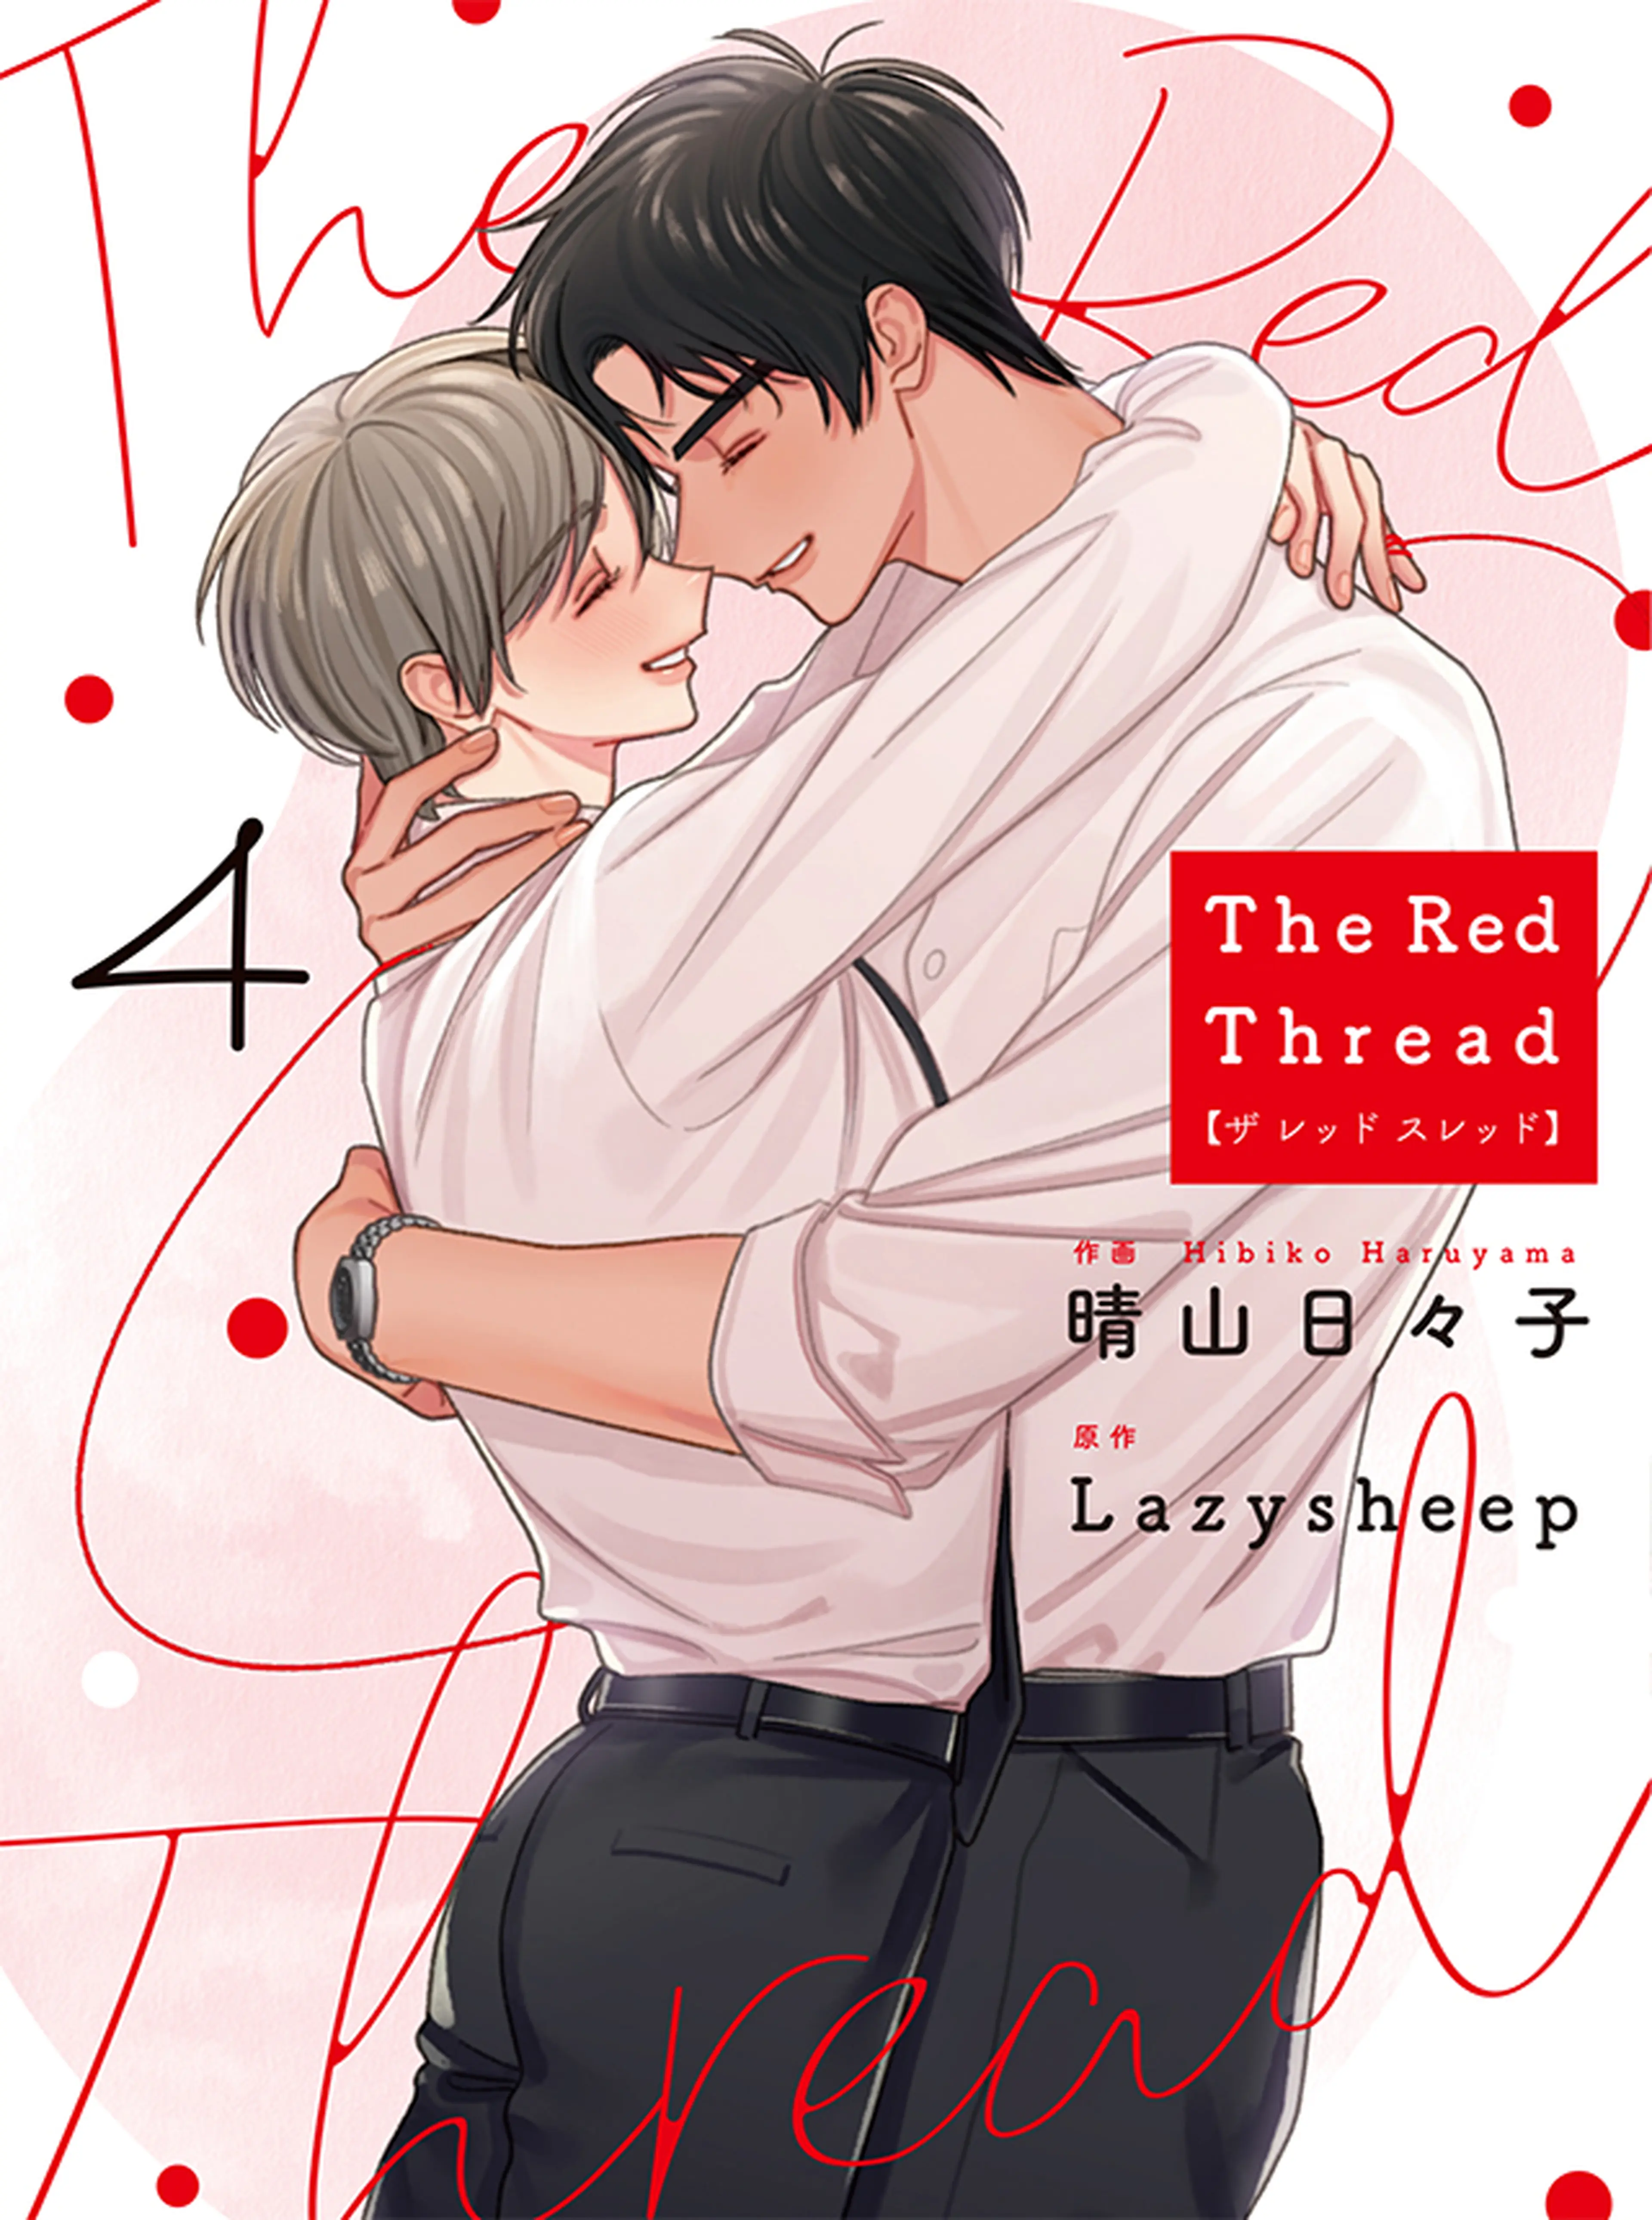 The Red Thread - pixivコミック